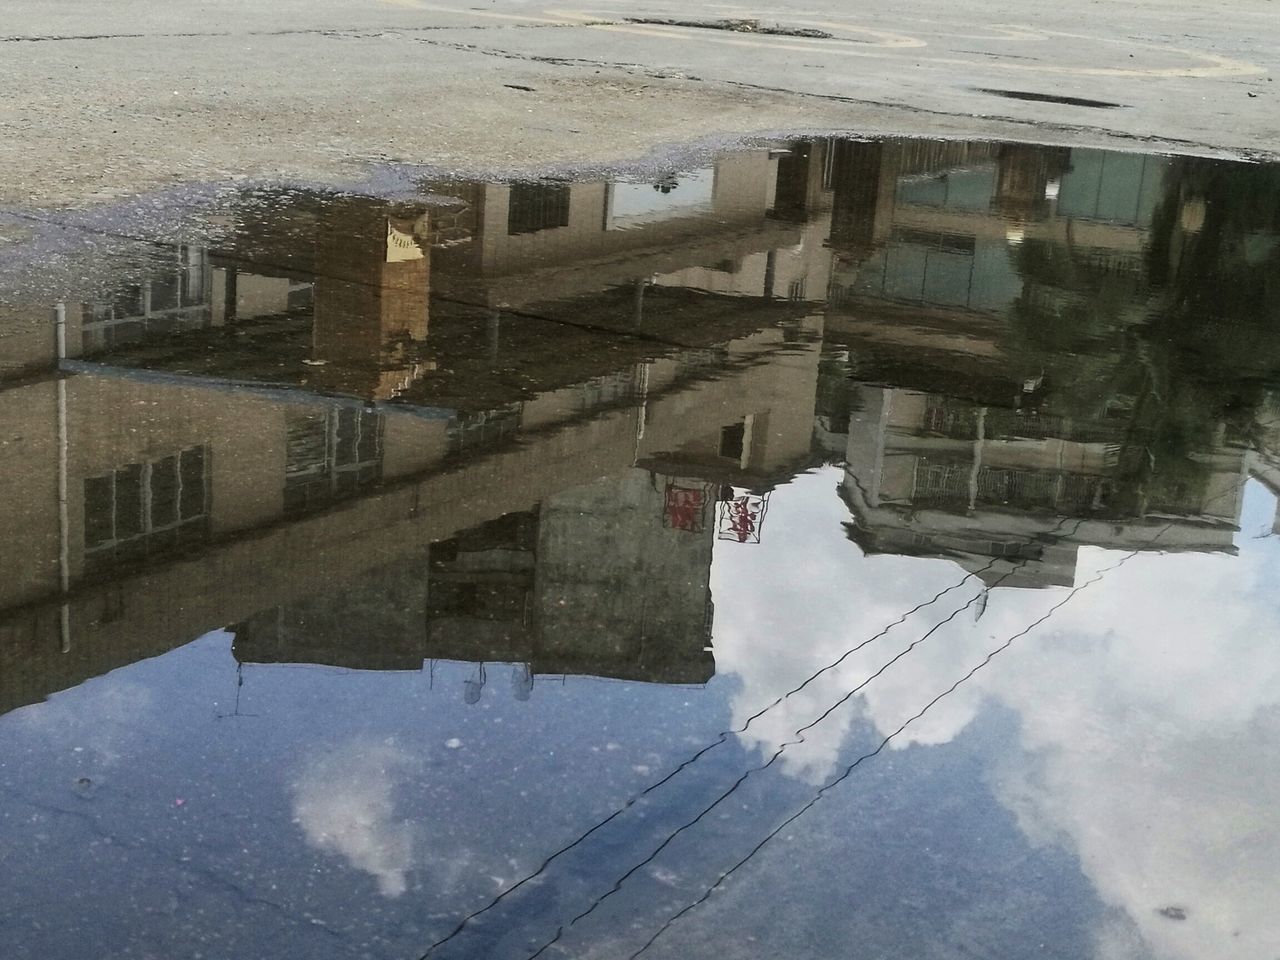 REFLECTION OF CITY IN PUDDLE